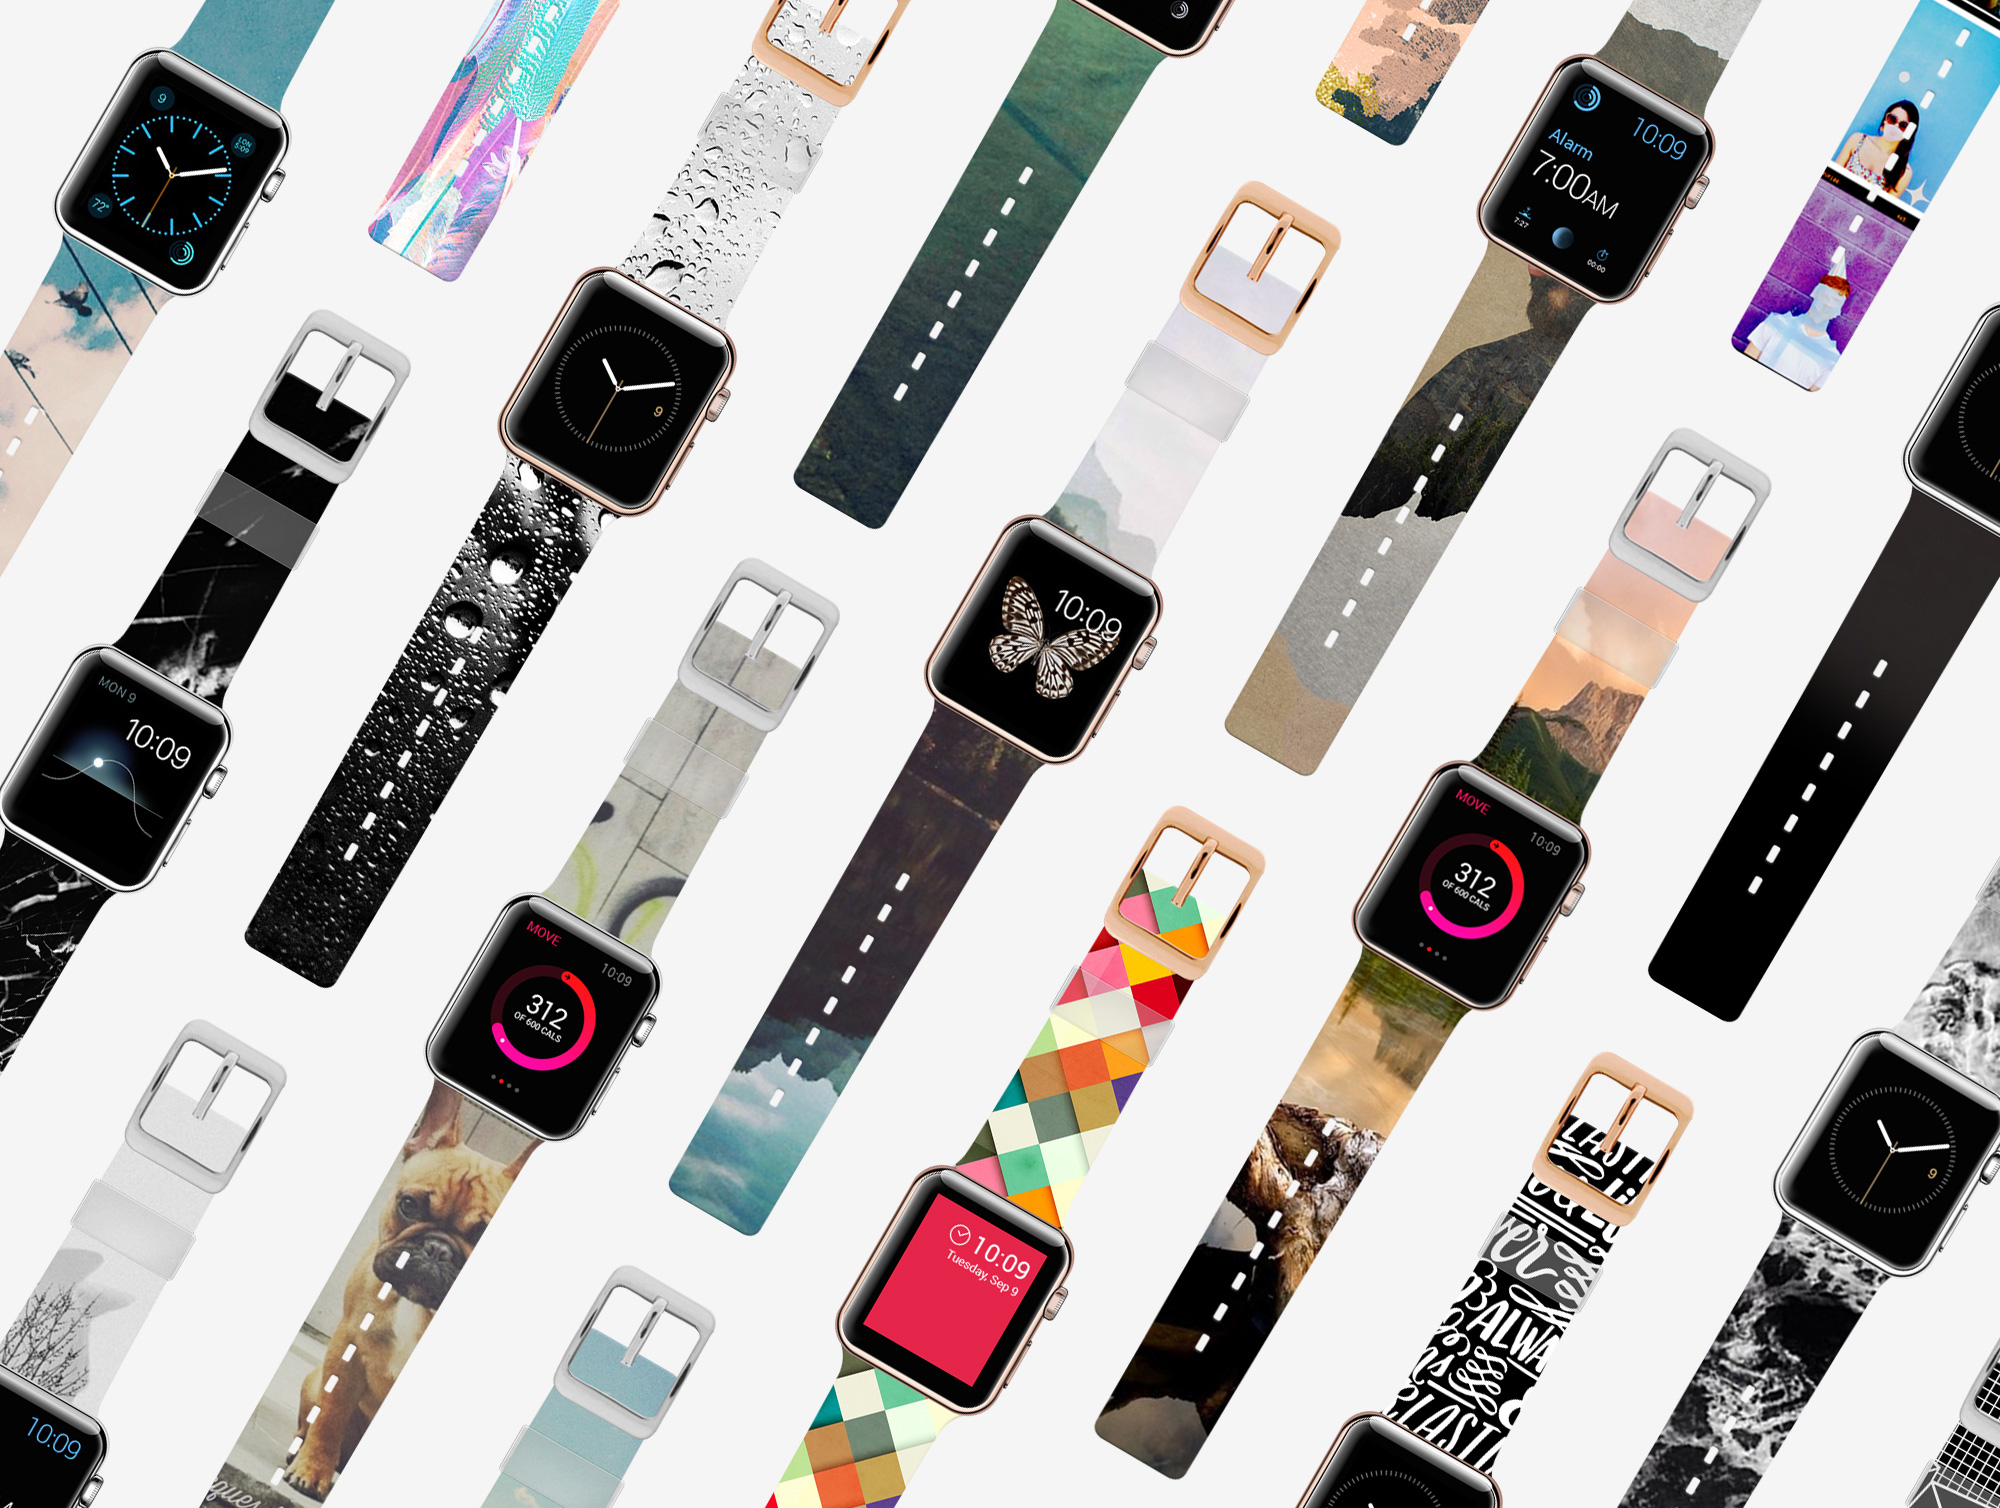 top-6-coolest-apple-watch-bands-you-can-t-resist-wiproo